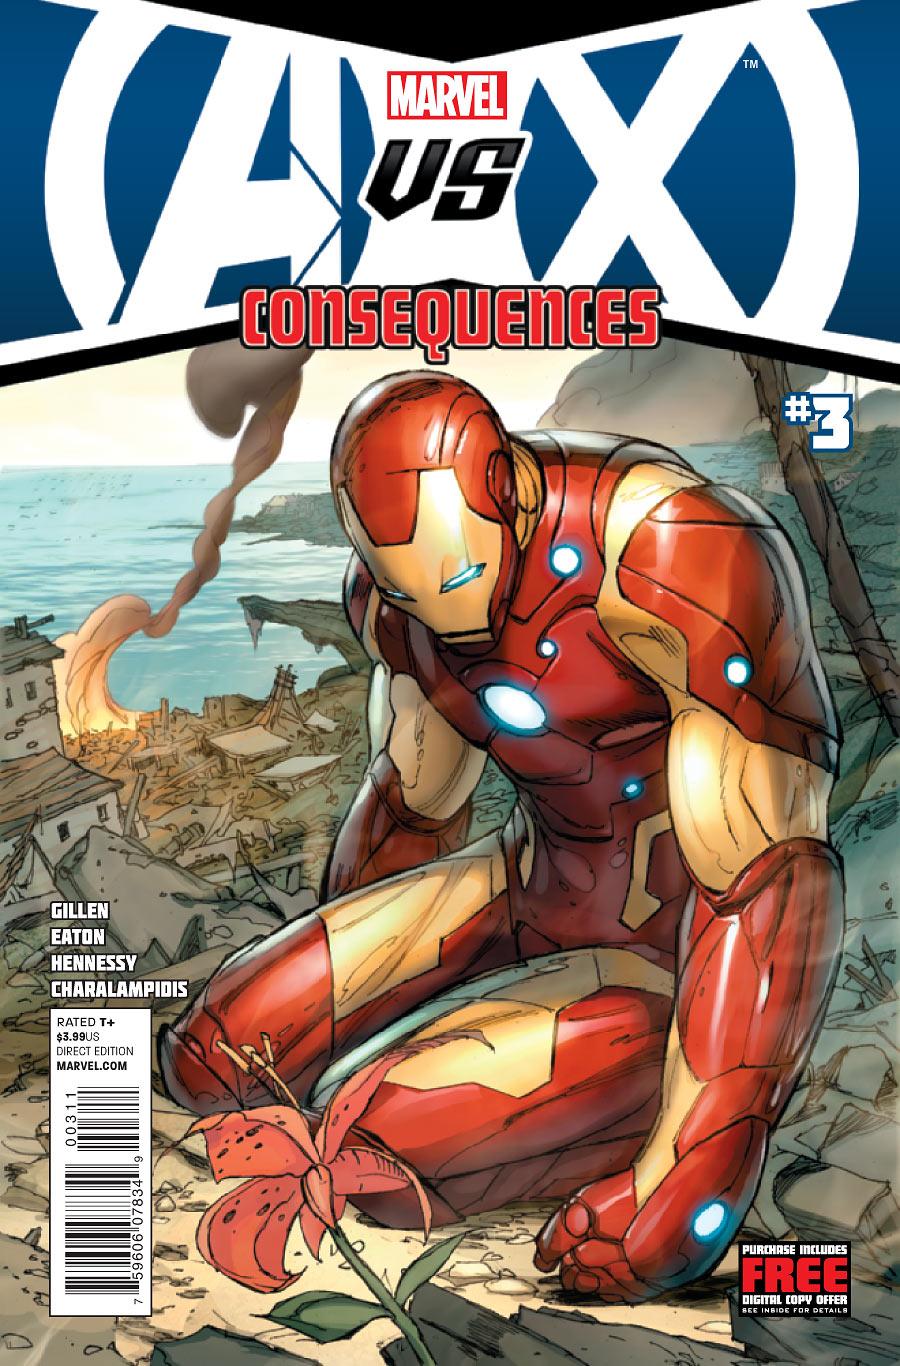 AvX: Consequences Vol. 1 #3